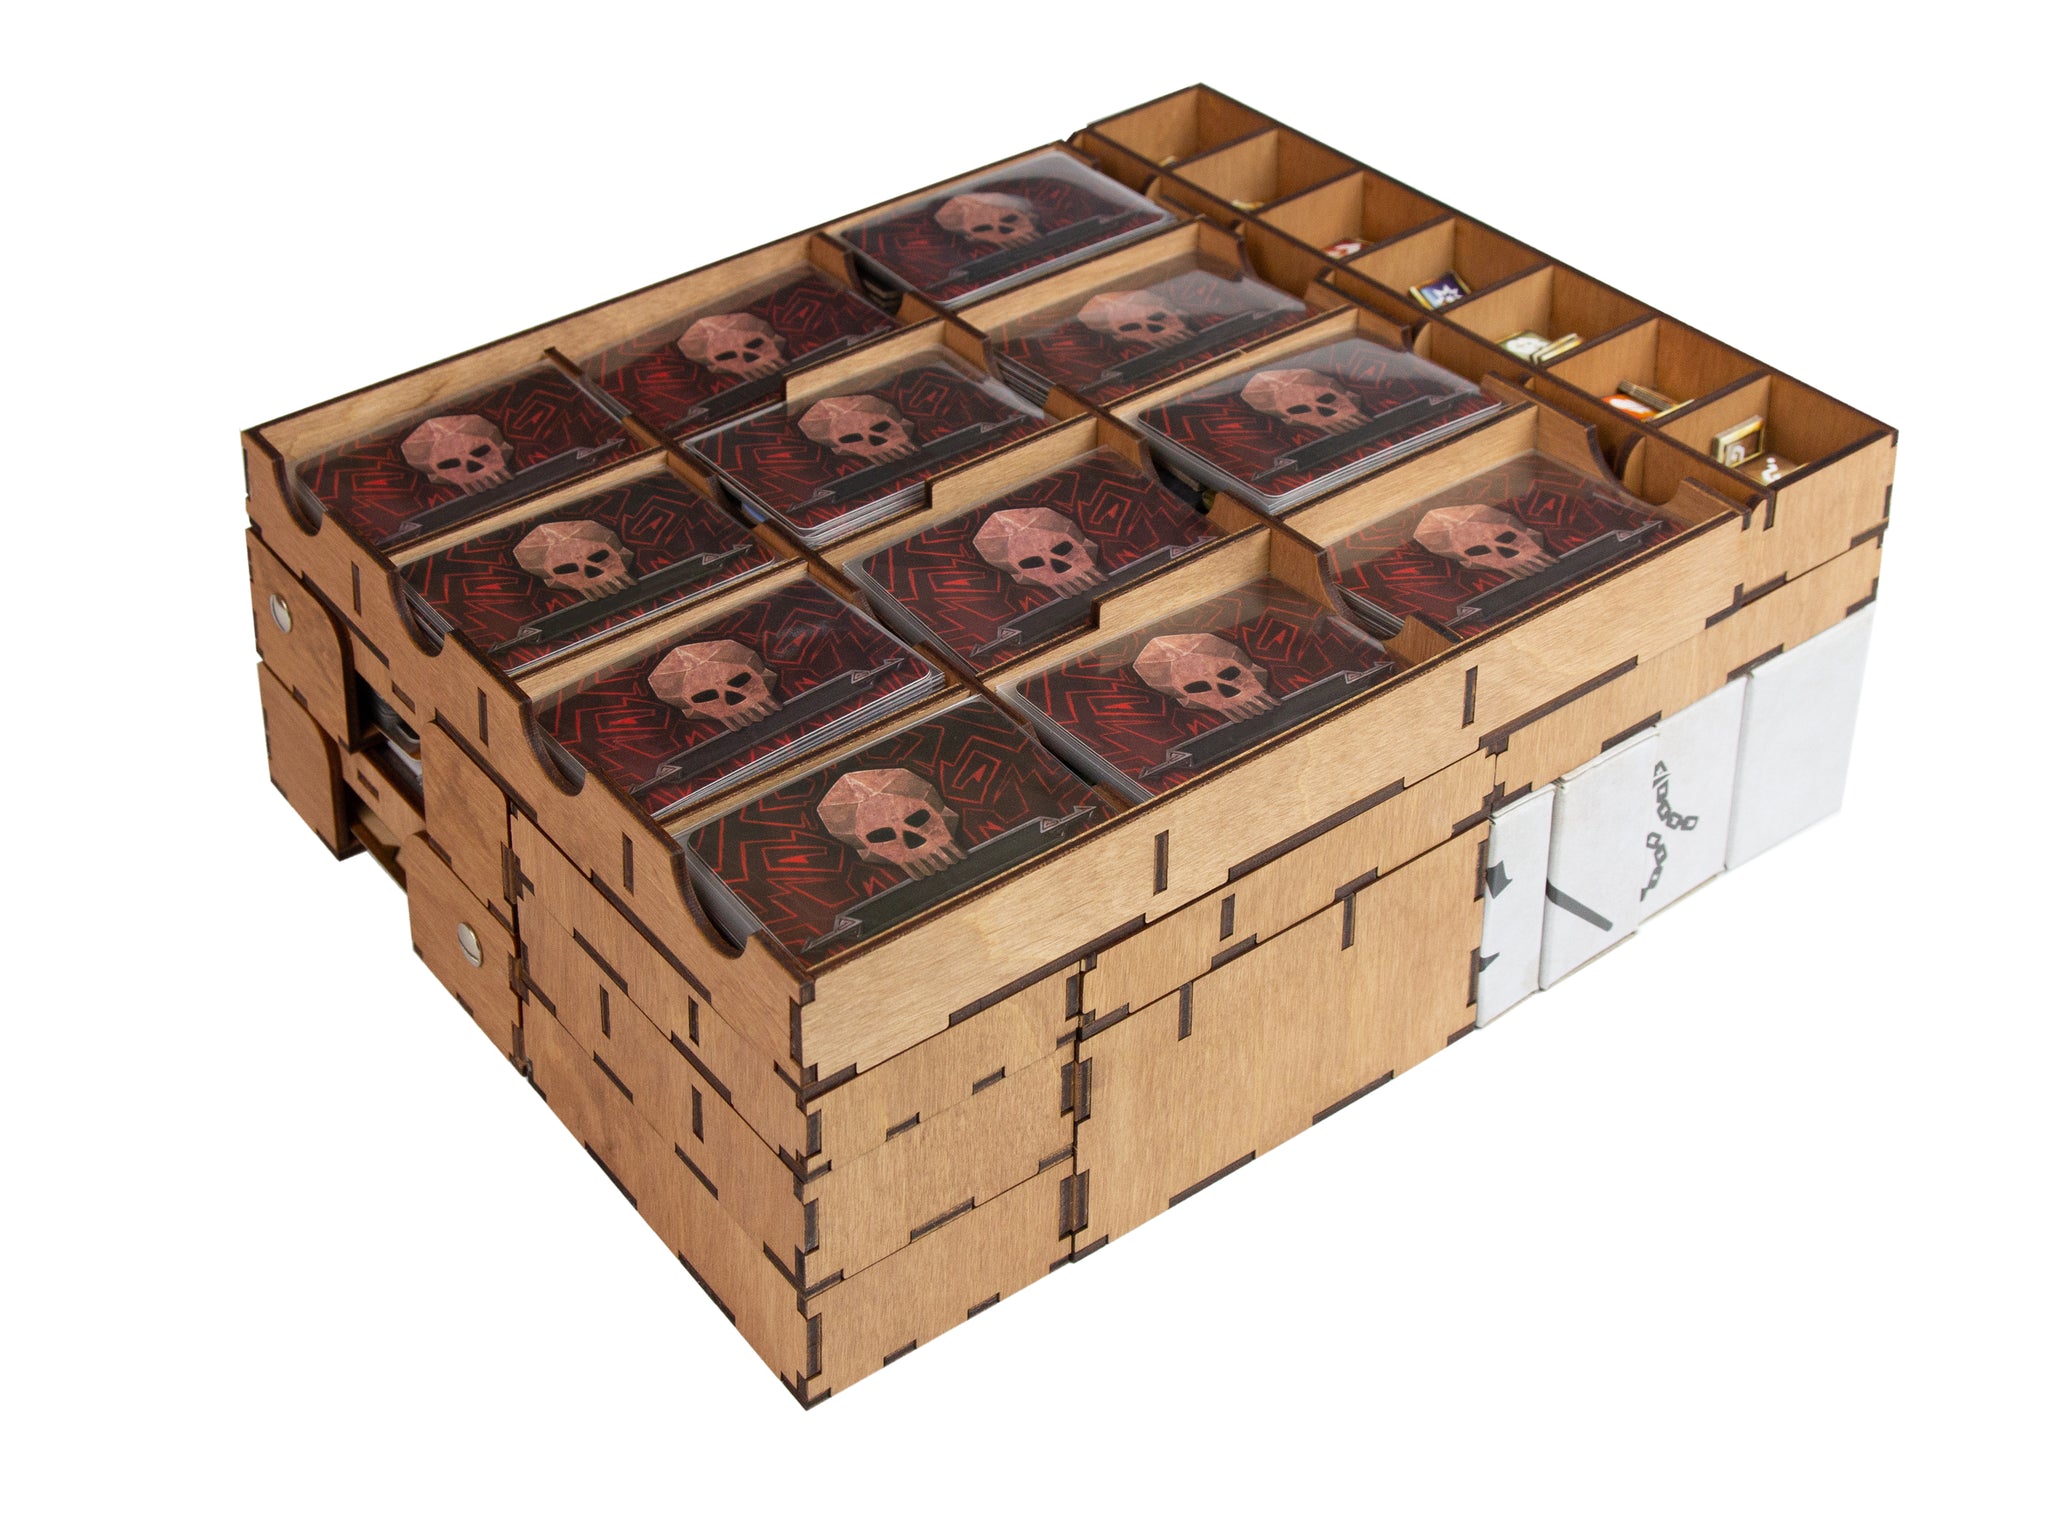 Smonex Wooden Organizer and Four Player Boards Compatible with Gloomhaven  Board Game with Wooden Monster Stands, Count Monsters Live, 24 pcs